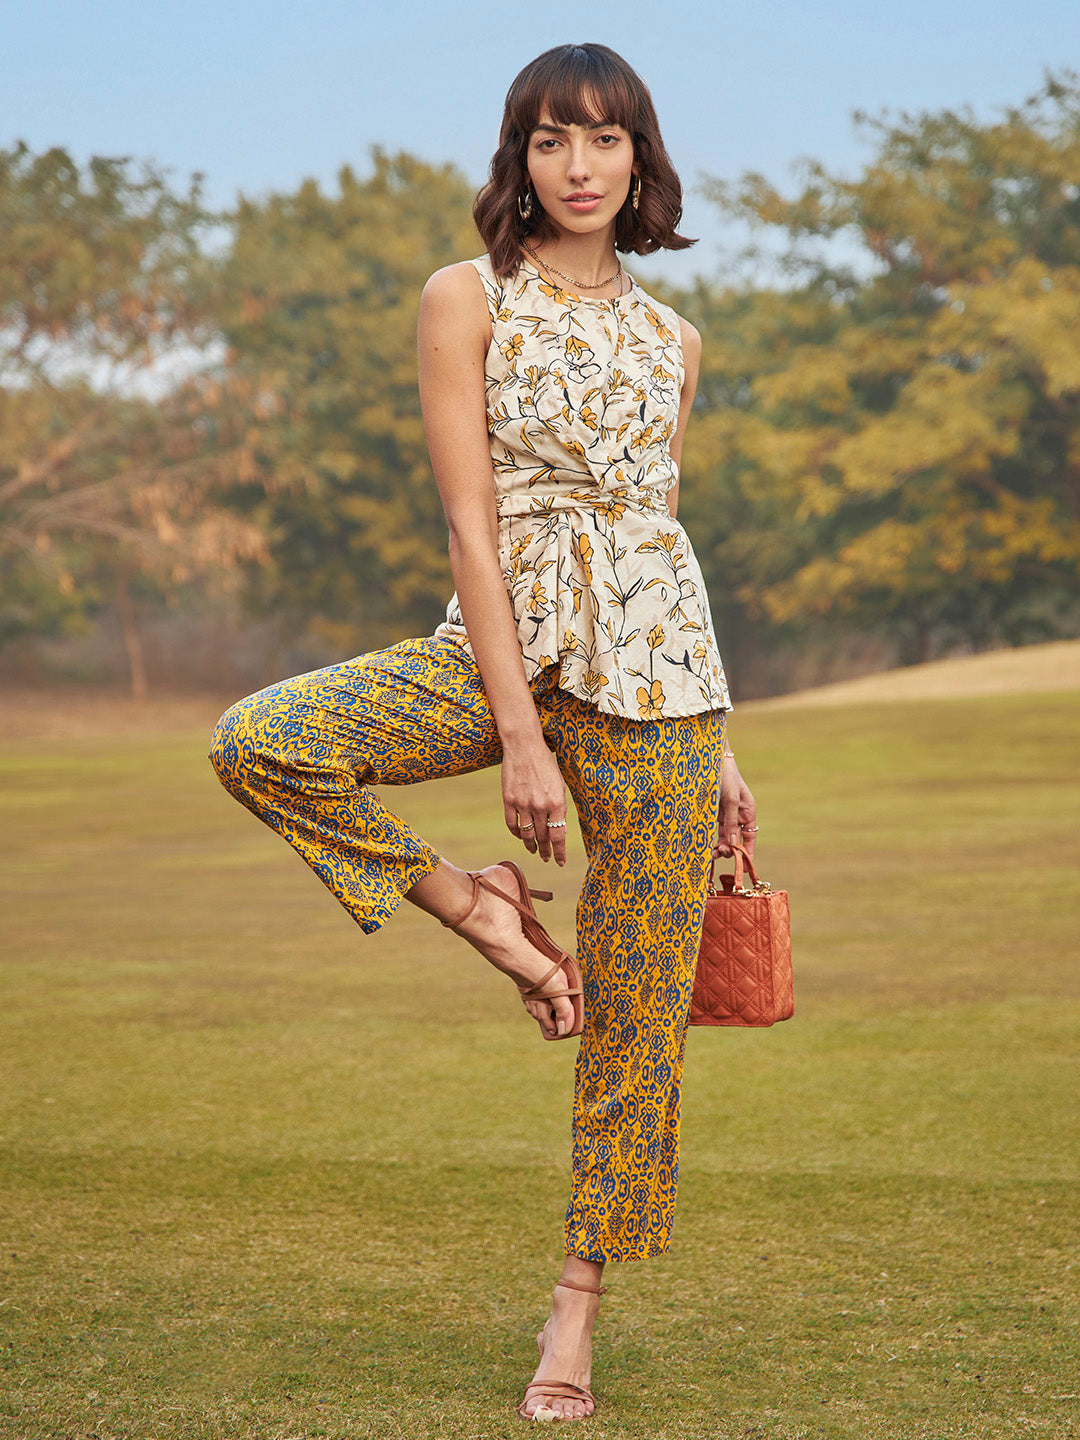 Yellow Floral Printed Knotted Top - Women Tops